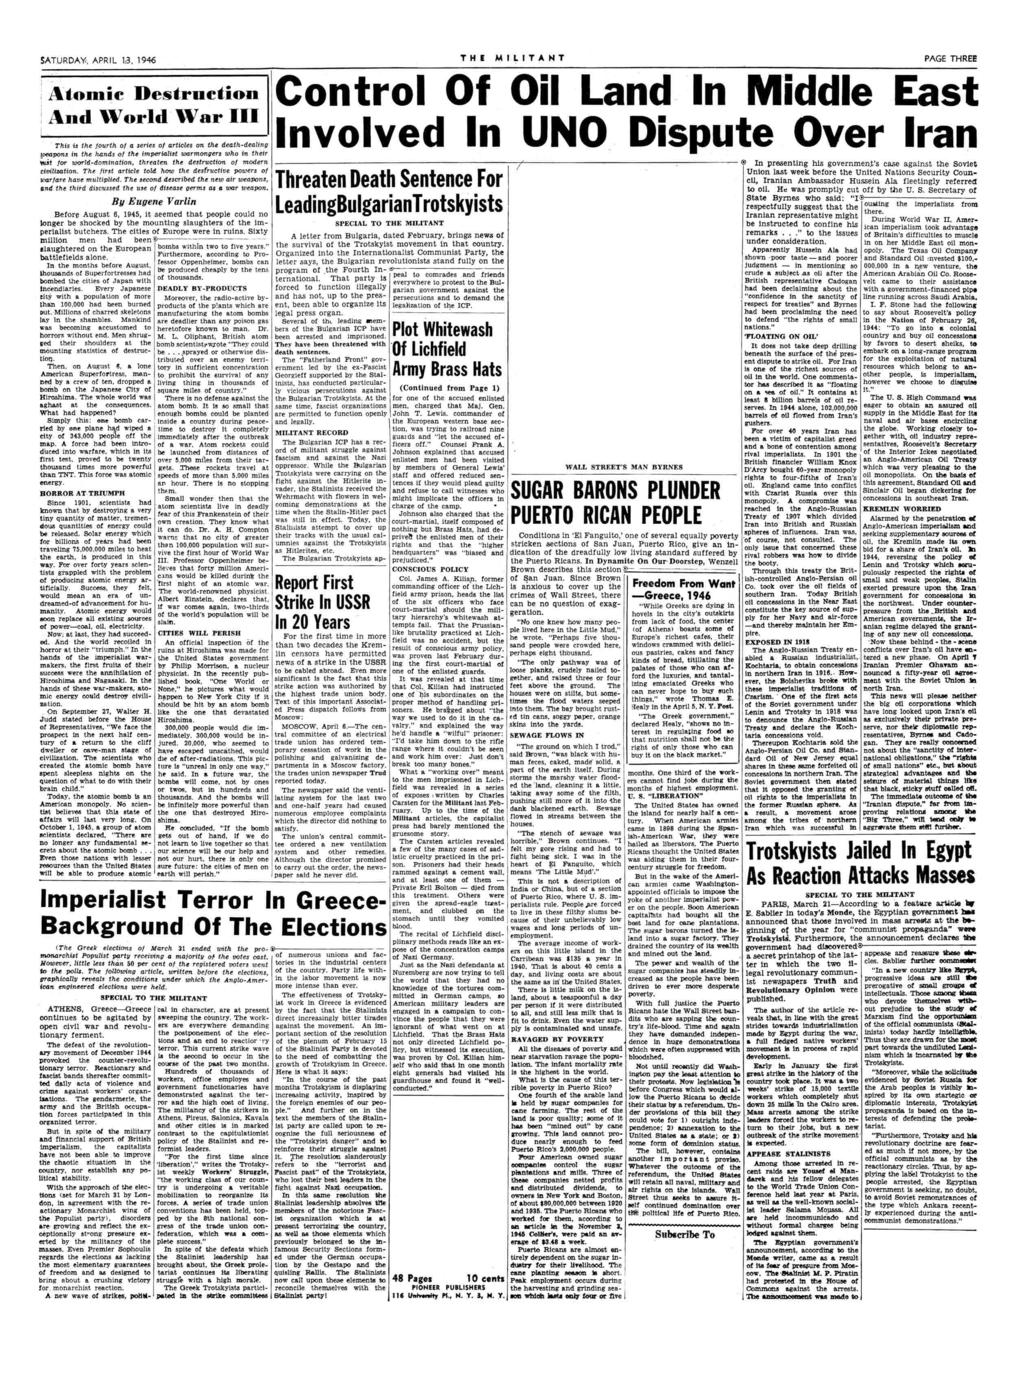 SATURDAY, APRIL 13, 1946 THE MILITANT PAGE THREE Atomic Destruction And World War I I I This is the fourth of a series of articles on the death-dealing loeapons in the hands of the imperialist